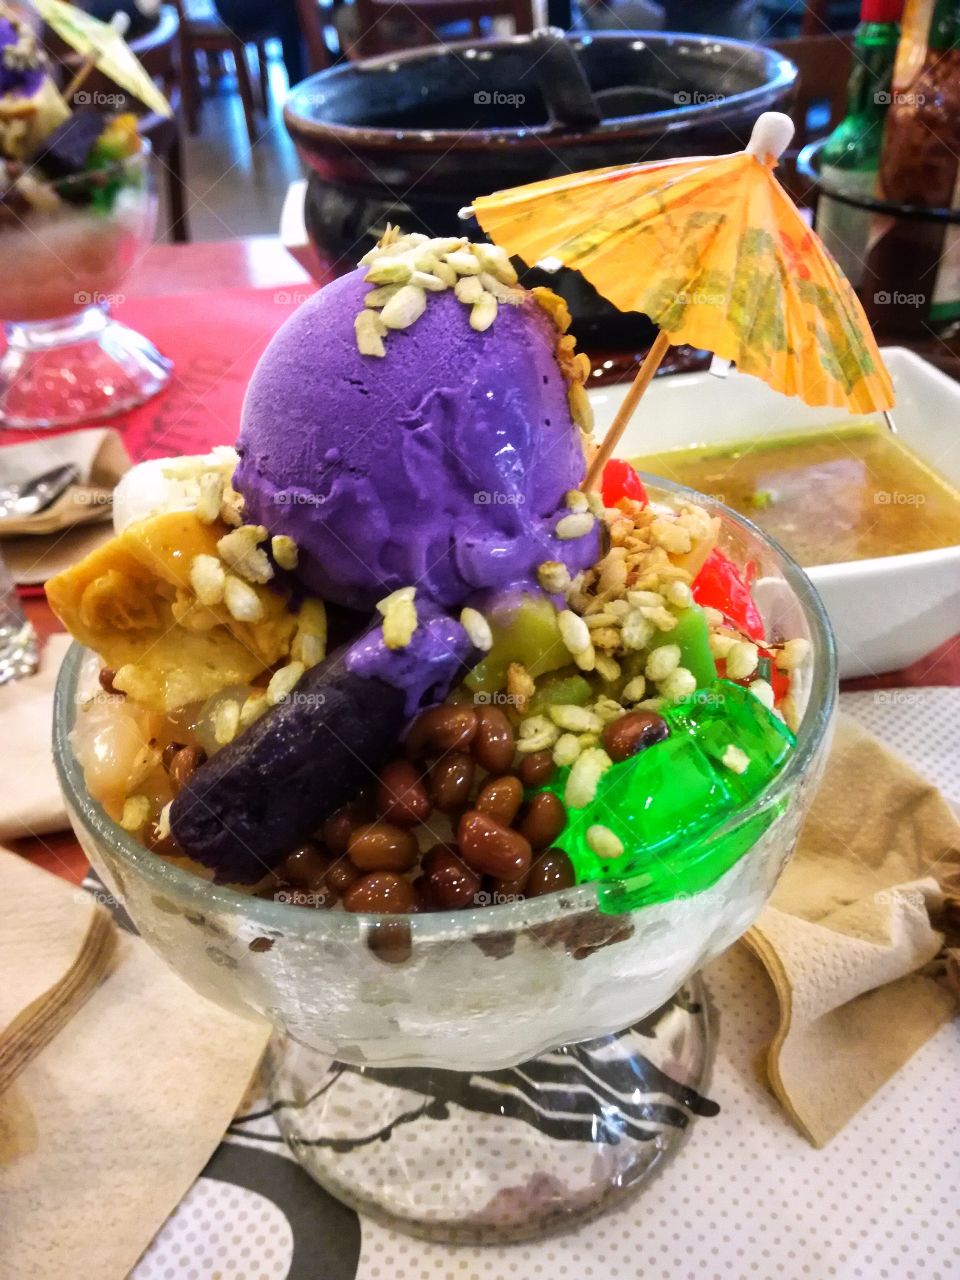 Halo-halo is a popular Filipino cold dessert which is a concoction of crushed ice, evaporated milk and various ingredients and topped with a scoop of ice cream. 😋